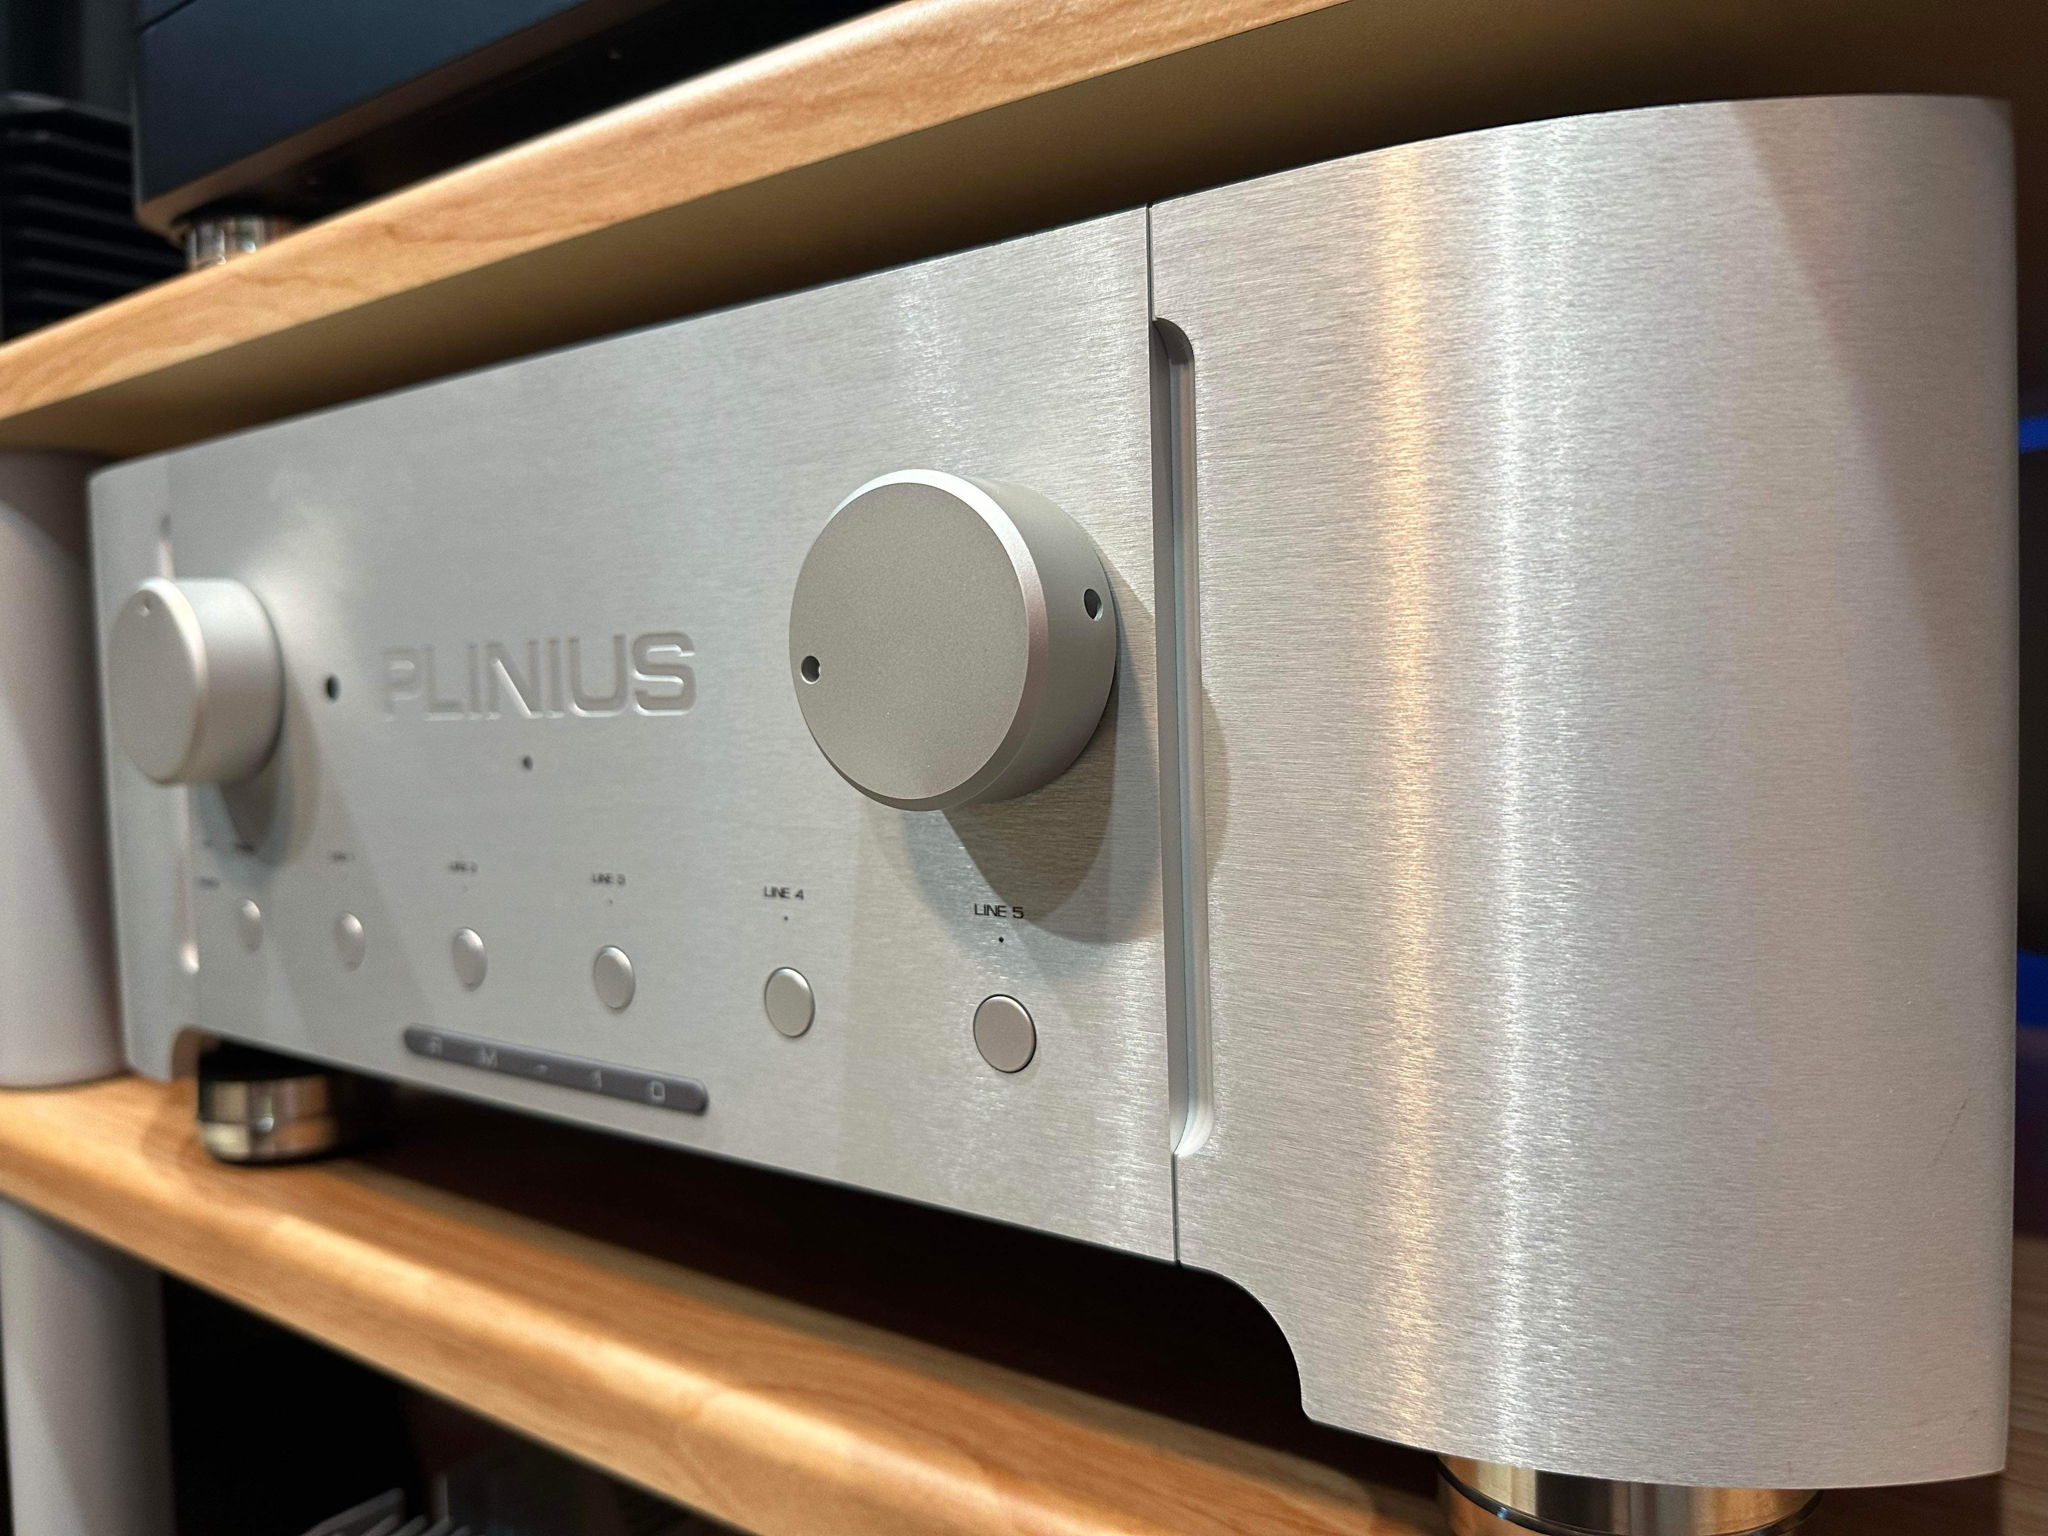 Plinius RM-10 preamplifier top of the line with remote